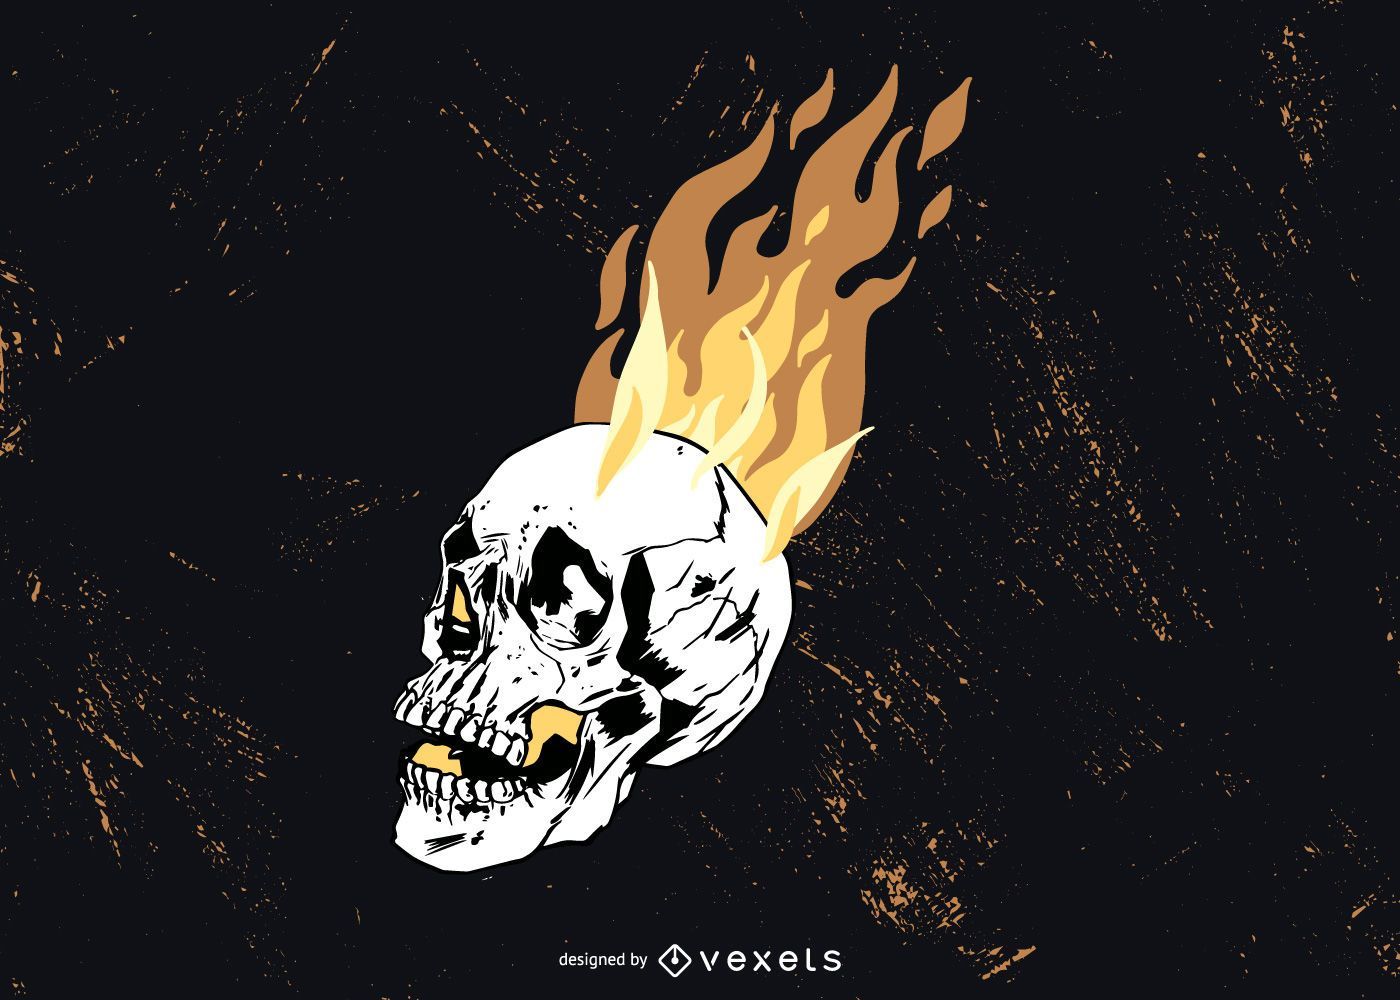 A skull with flames on a black background - Skeleton